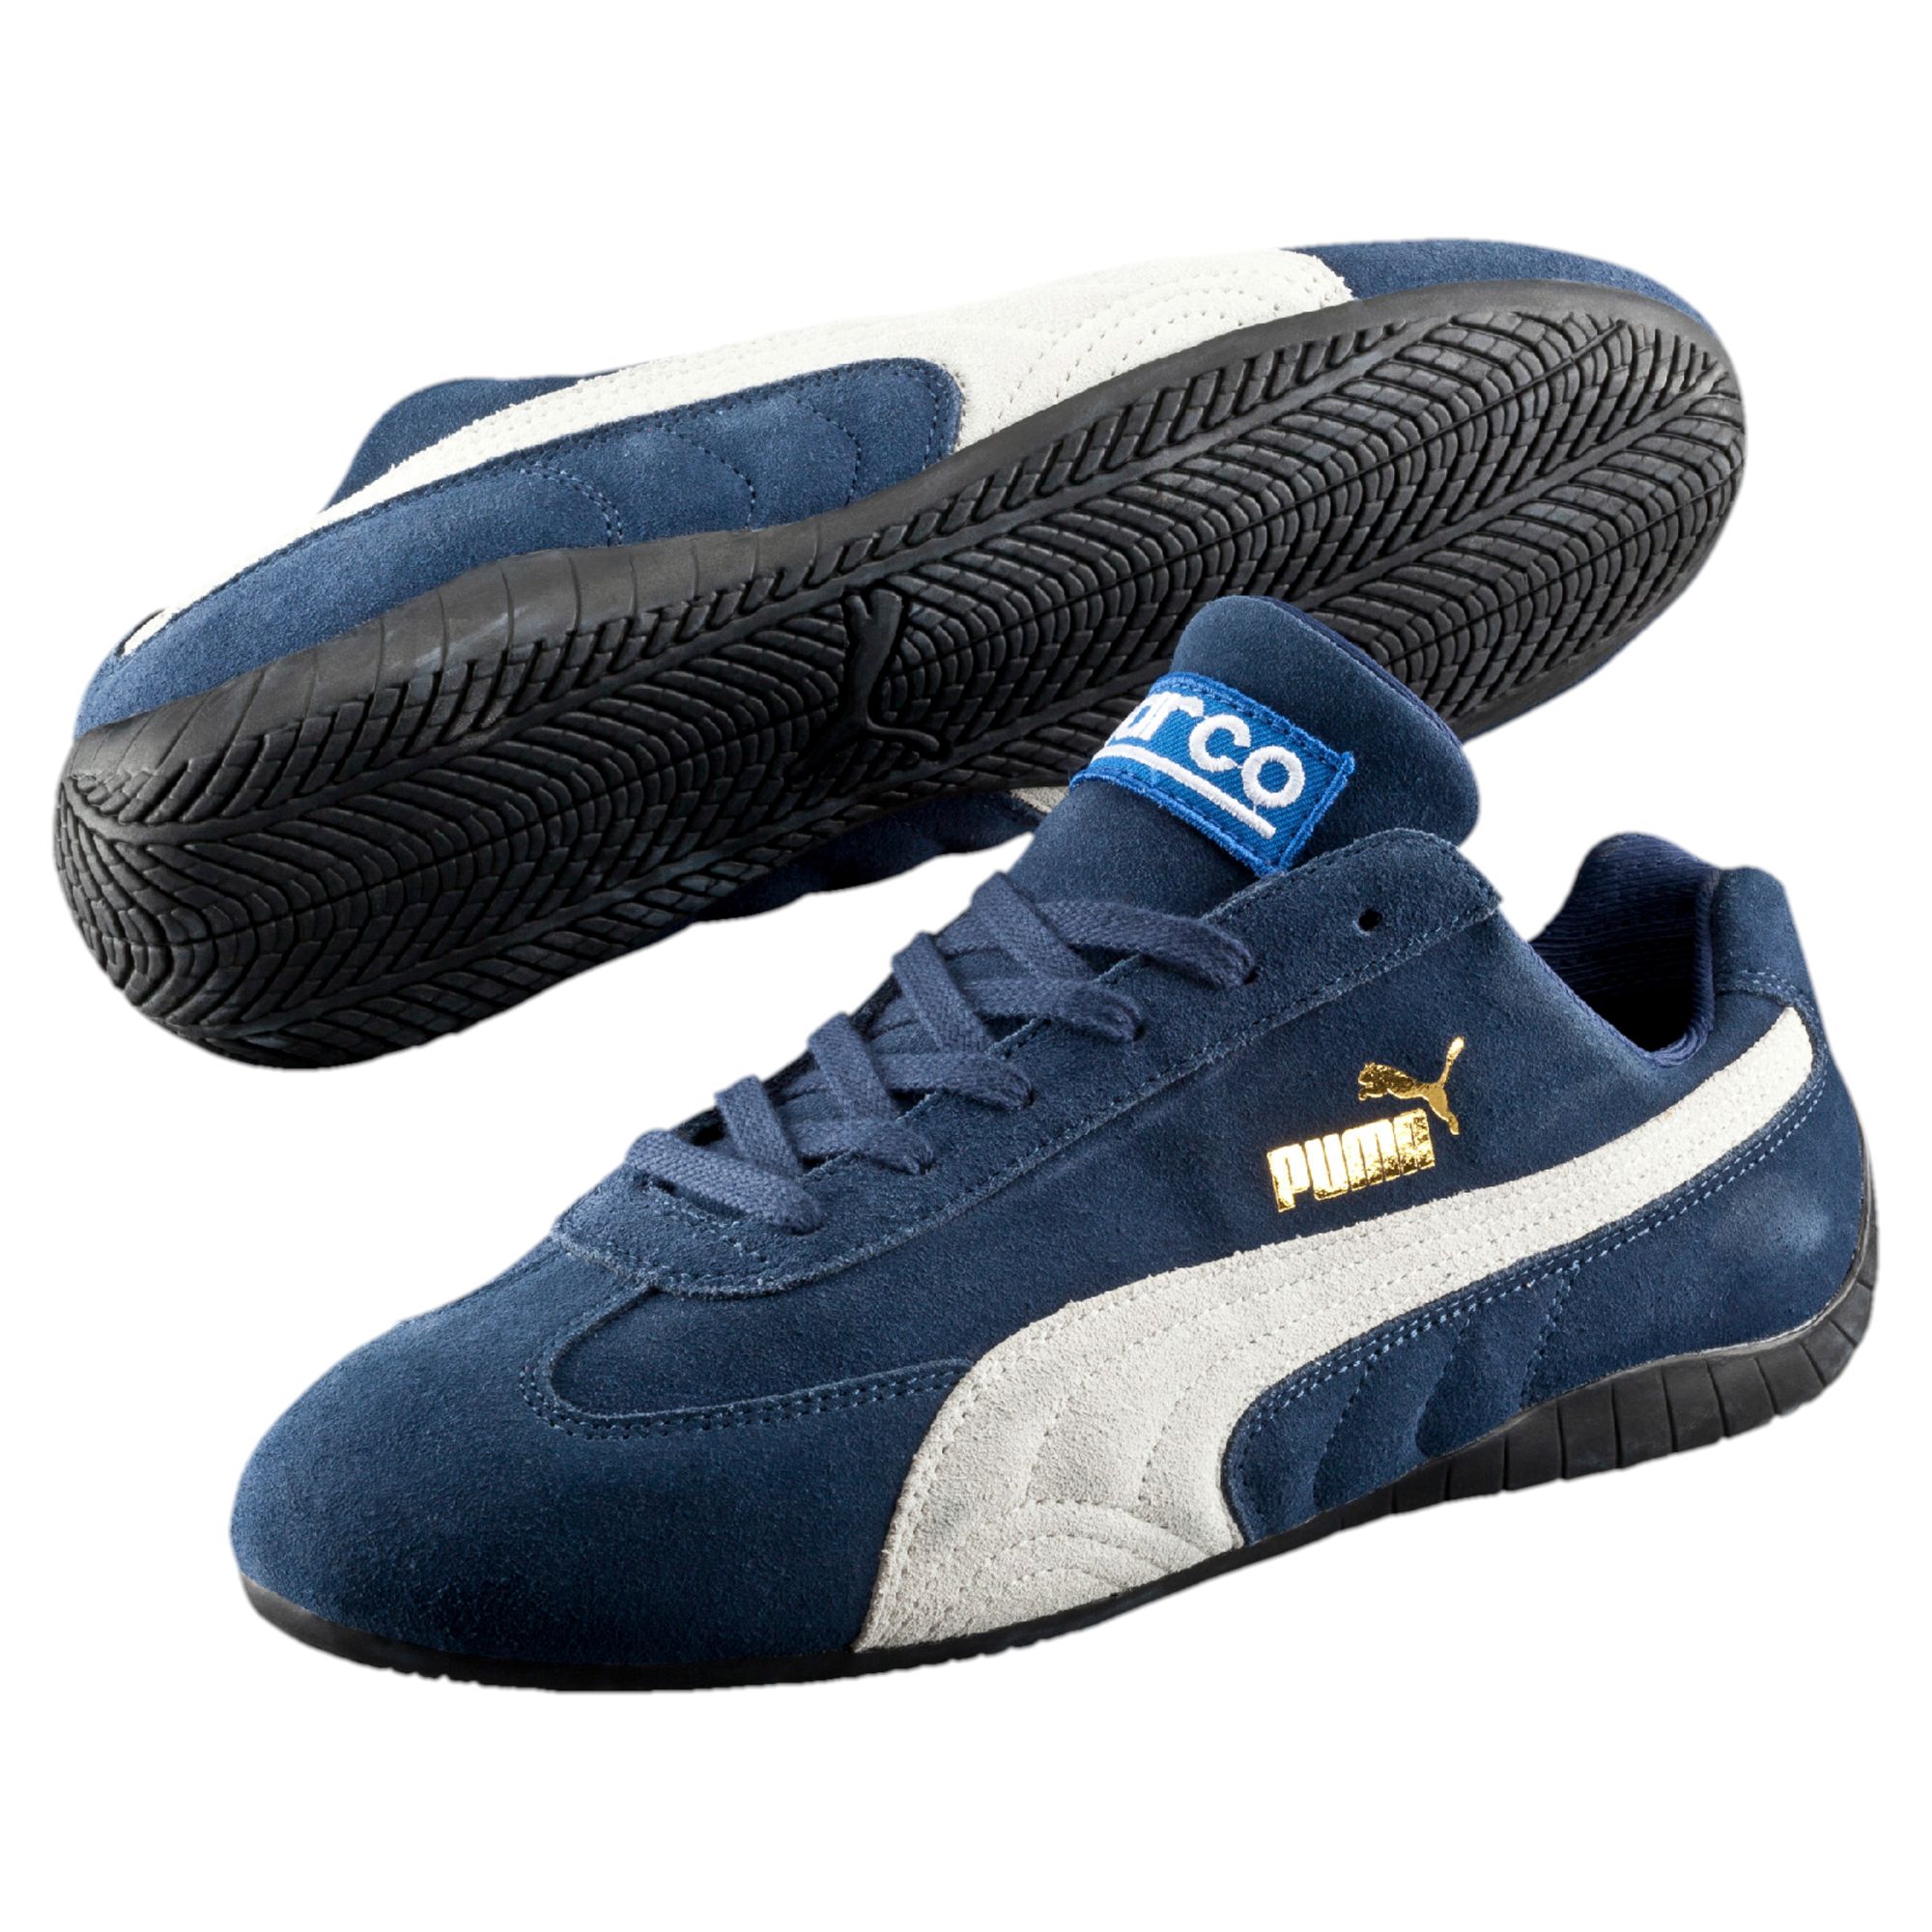 chaussure puma speed cat sparco